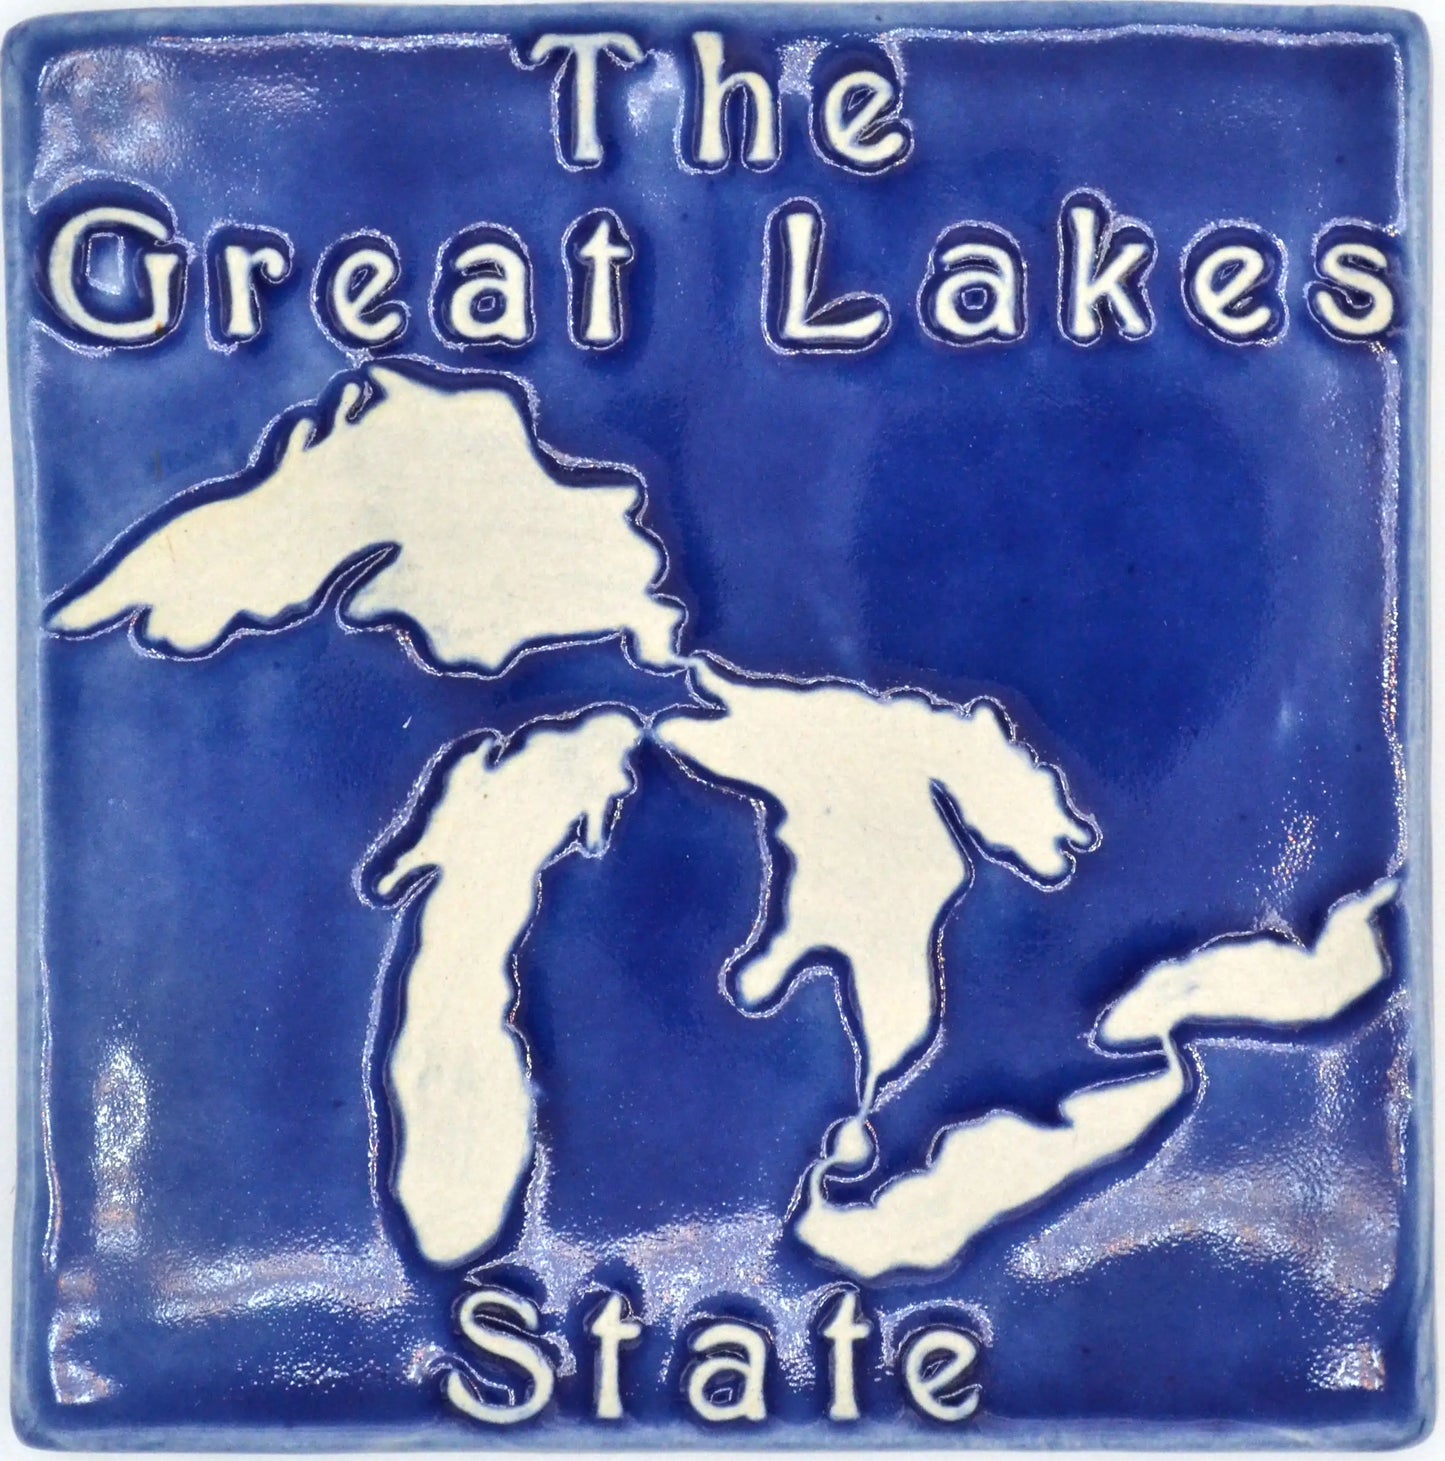 6x6 Great Lakes State - Tile